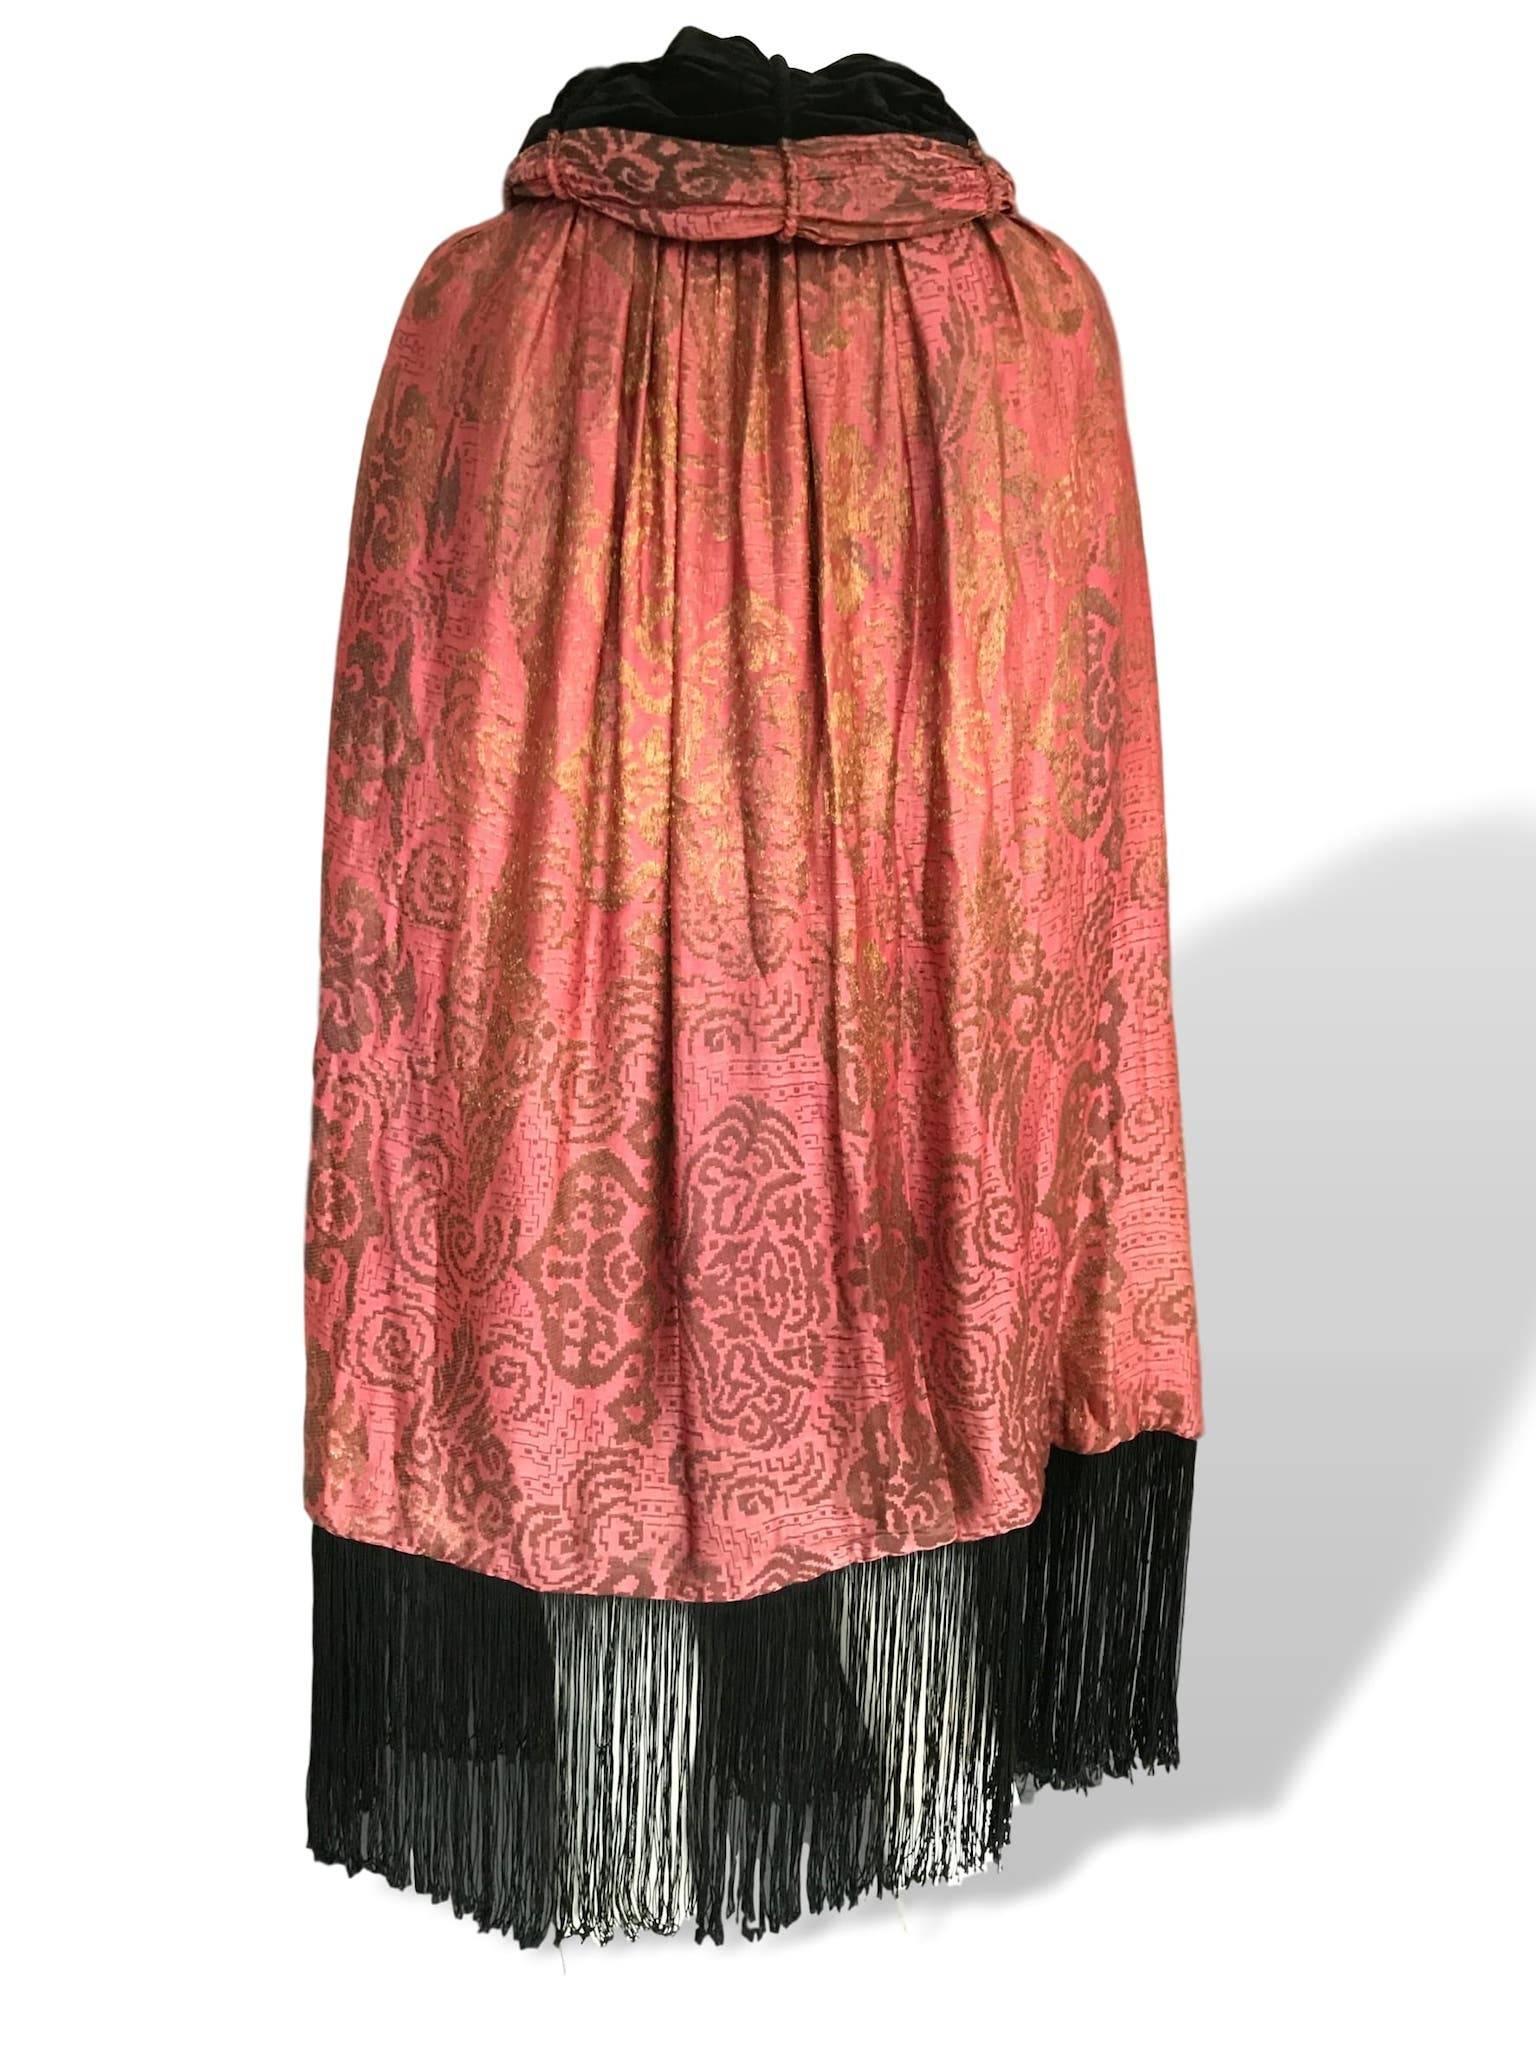 1920s reversible gold metallic damask pink silk and black velvet on reverse cocoon coat/cape. With fringed hem and button neck fastening on both sides. 
In very good condition, a small section of fringe is missing on the hem. Measures 50 inches in